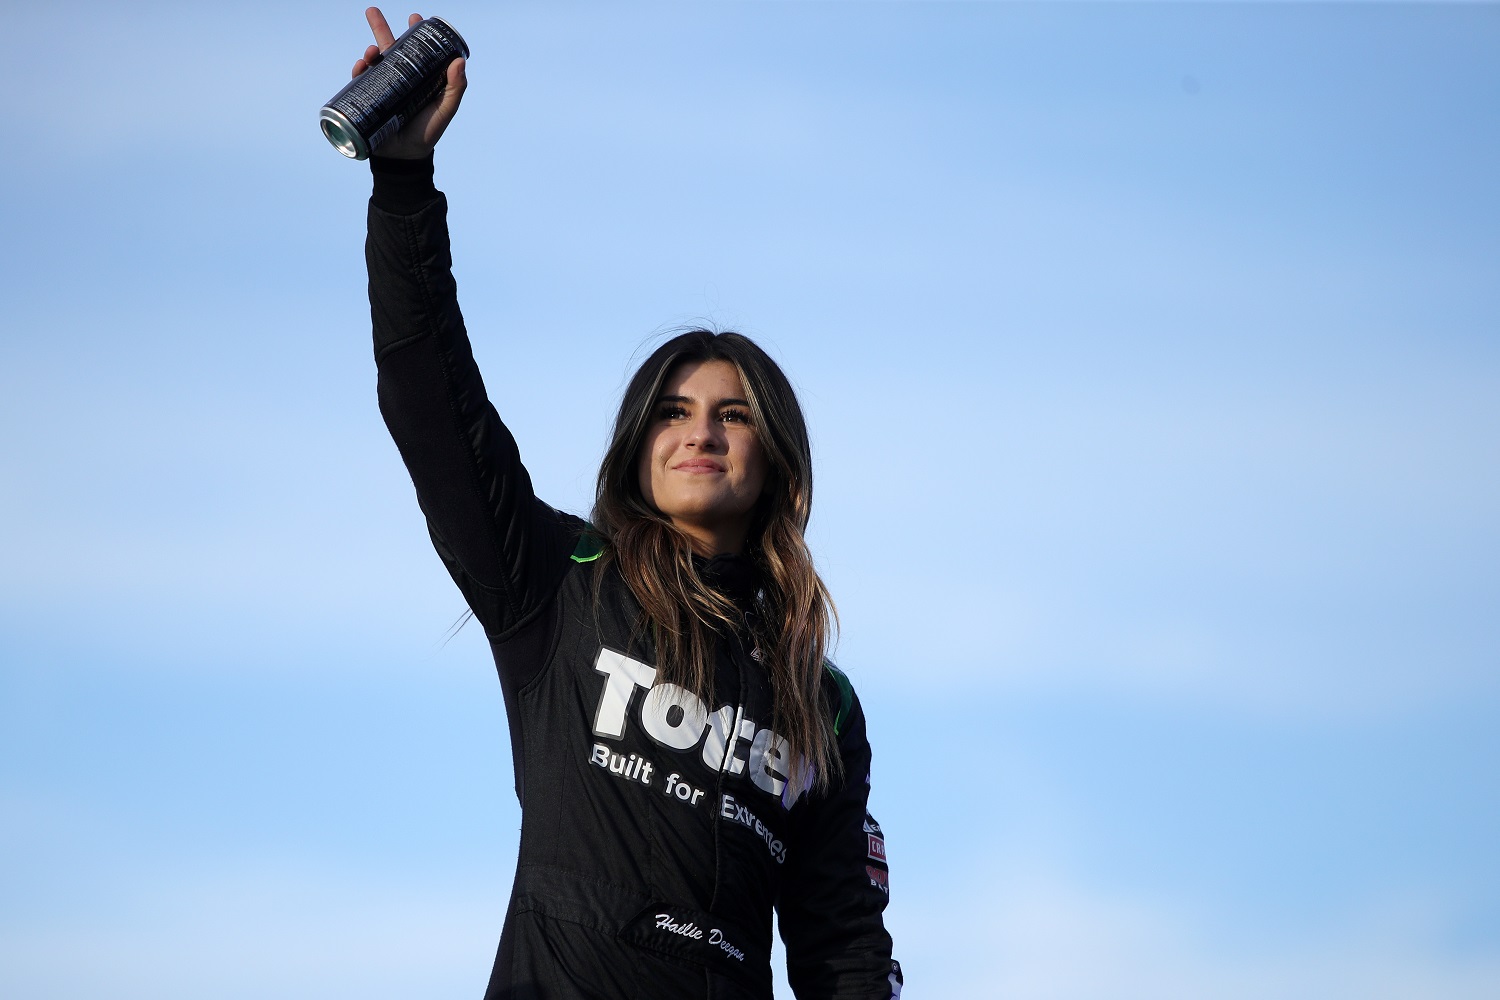 NASCAR Driver Hailie Deegan Is Going to the Tulsa Shootout With a Toolbox in Mind